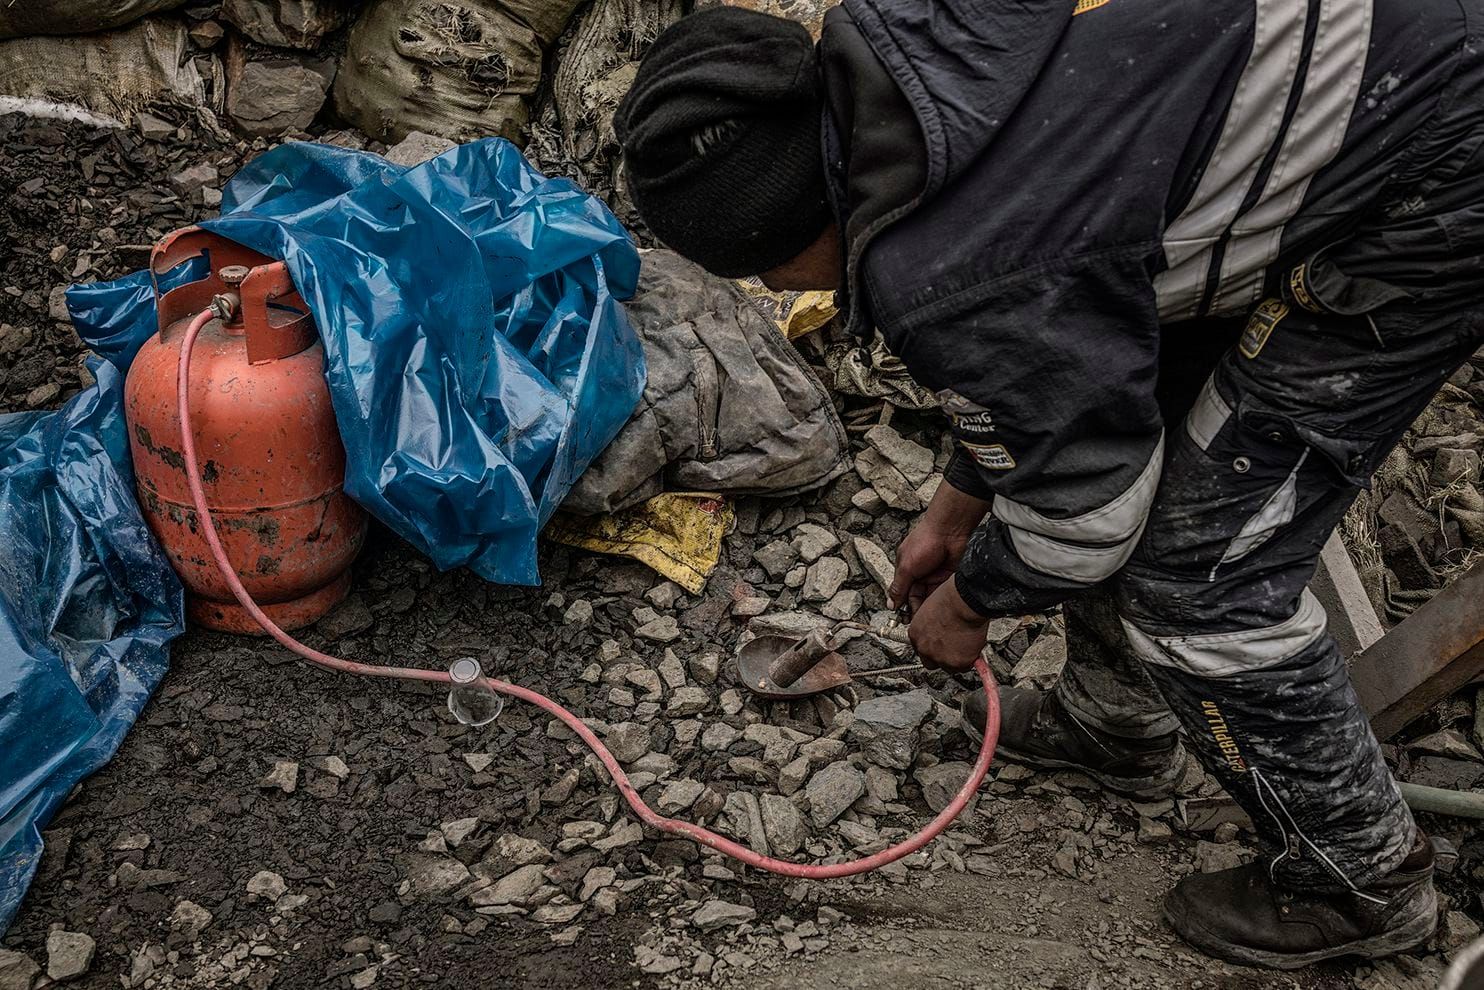 A worker laboring without any protection uses a blow torch with a flame so hot that it is invisible. It vaporizes mercury used to isolate gold from ore. Peru, 2019. Image by James Whitlow Delano.